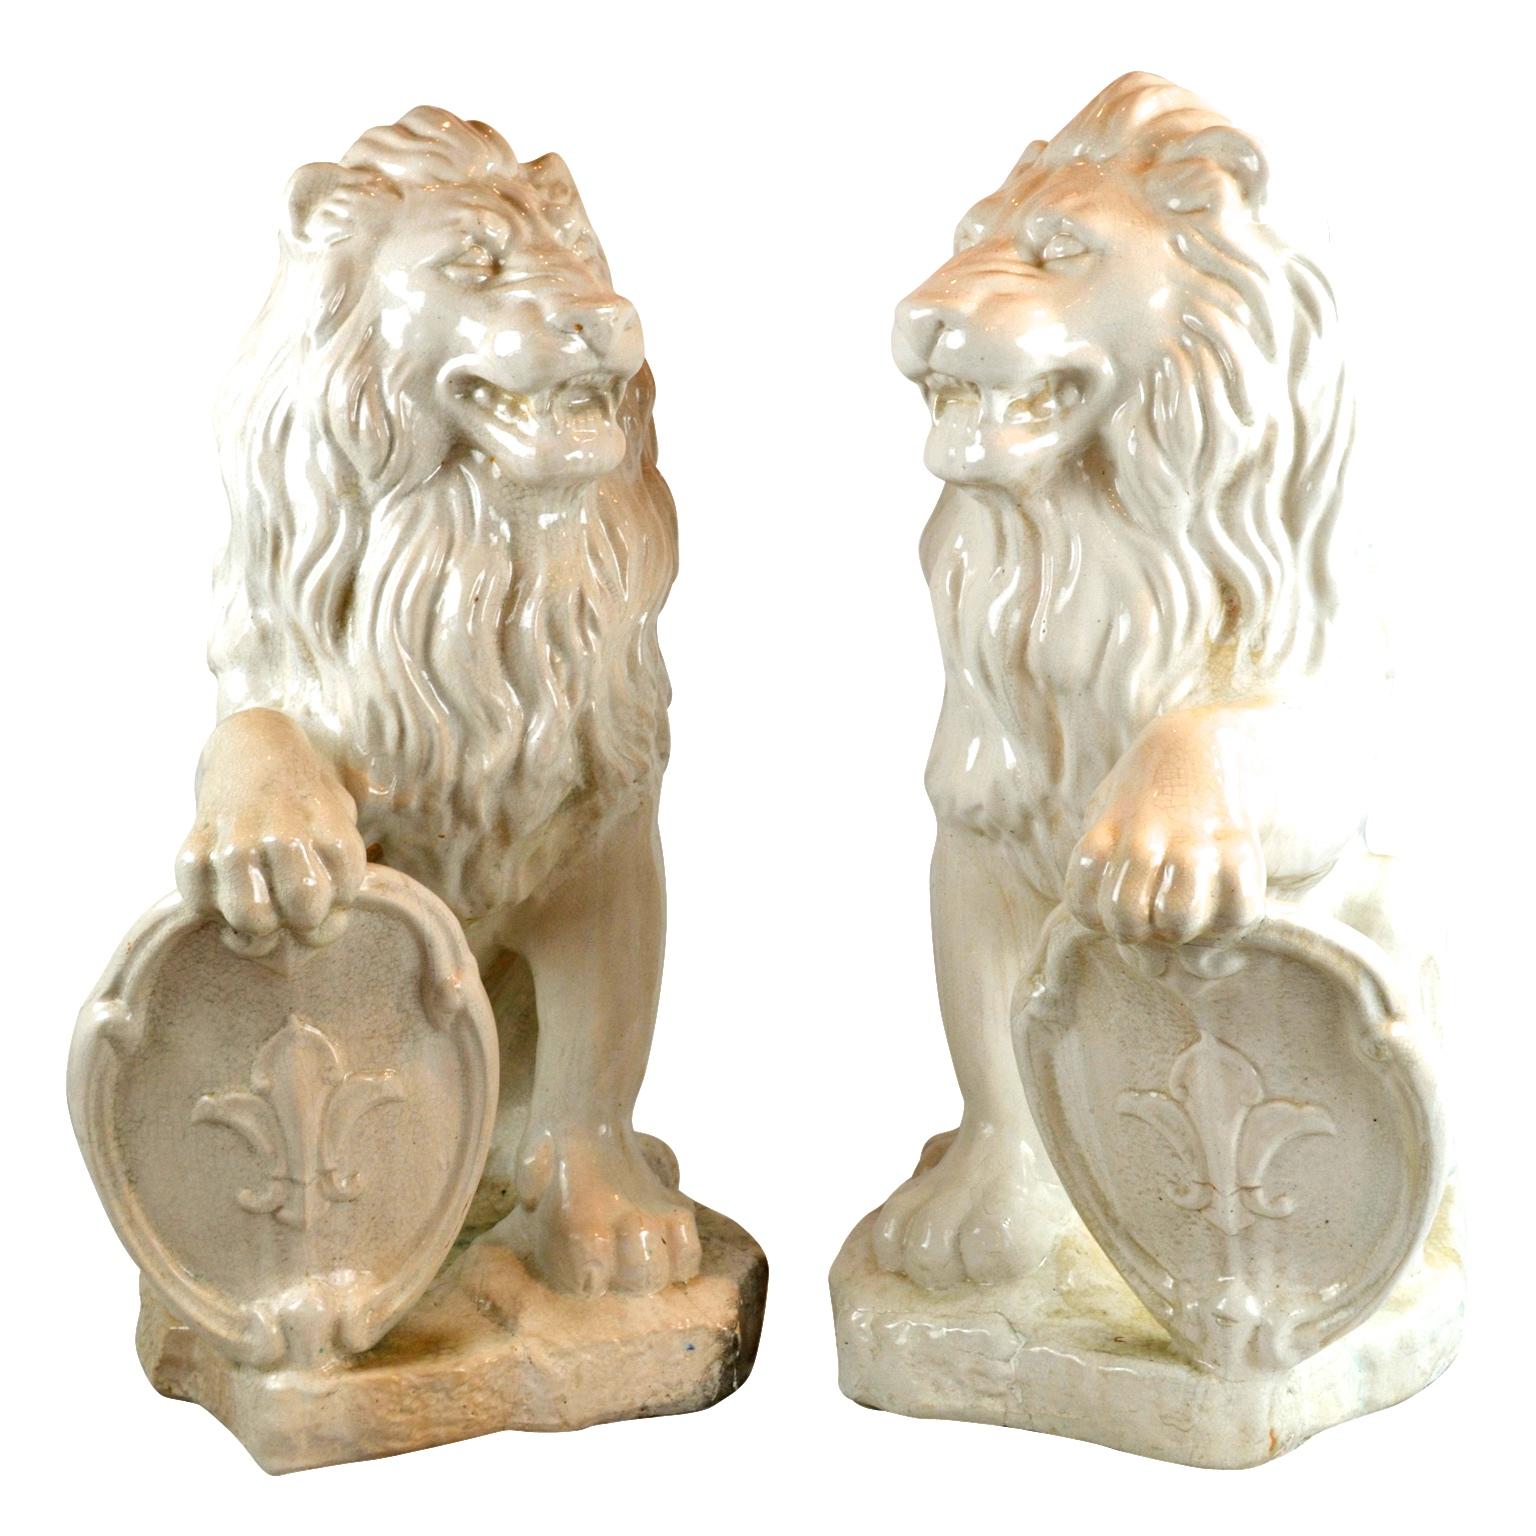 A decorative pair of terracotta rampant lions with white glazing, each sitting facing each other with one front foot resting on an oval shield decorated with a fleur-de-lys.

 